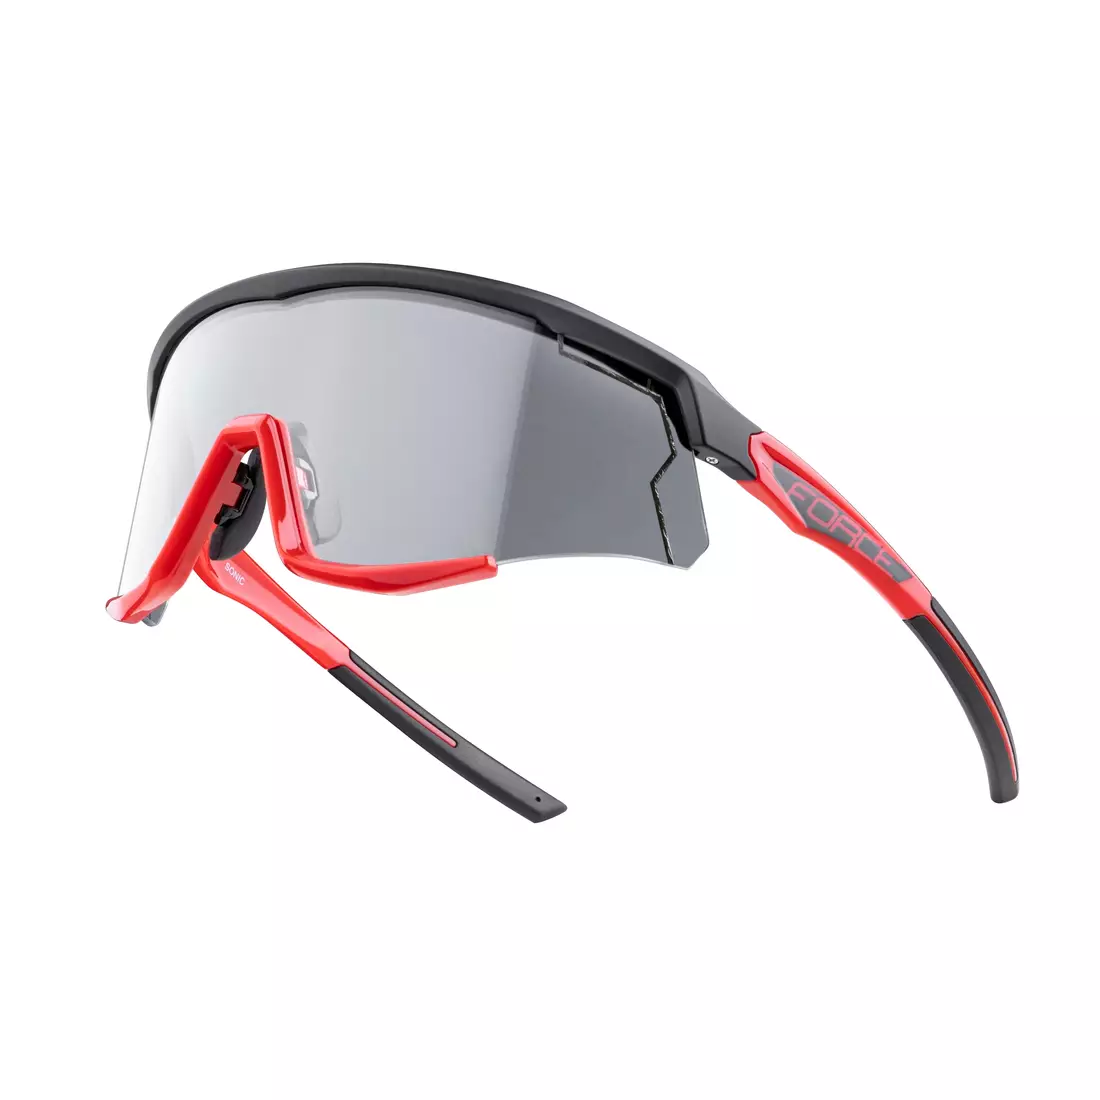 FORCE cycling / sports glasses SONIC, Photochromic, black and red, 910957